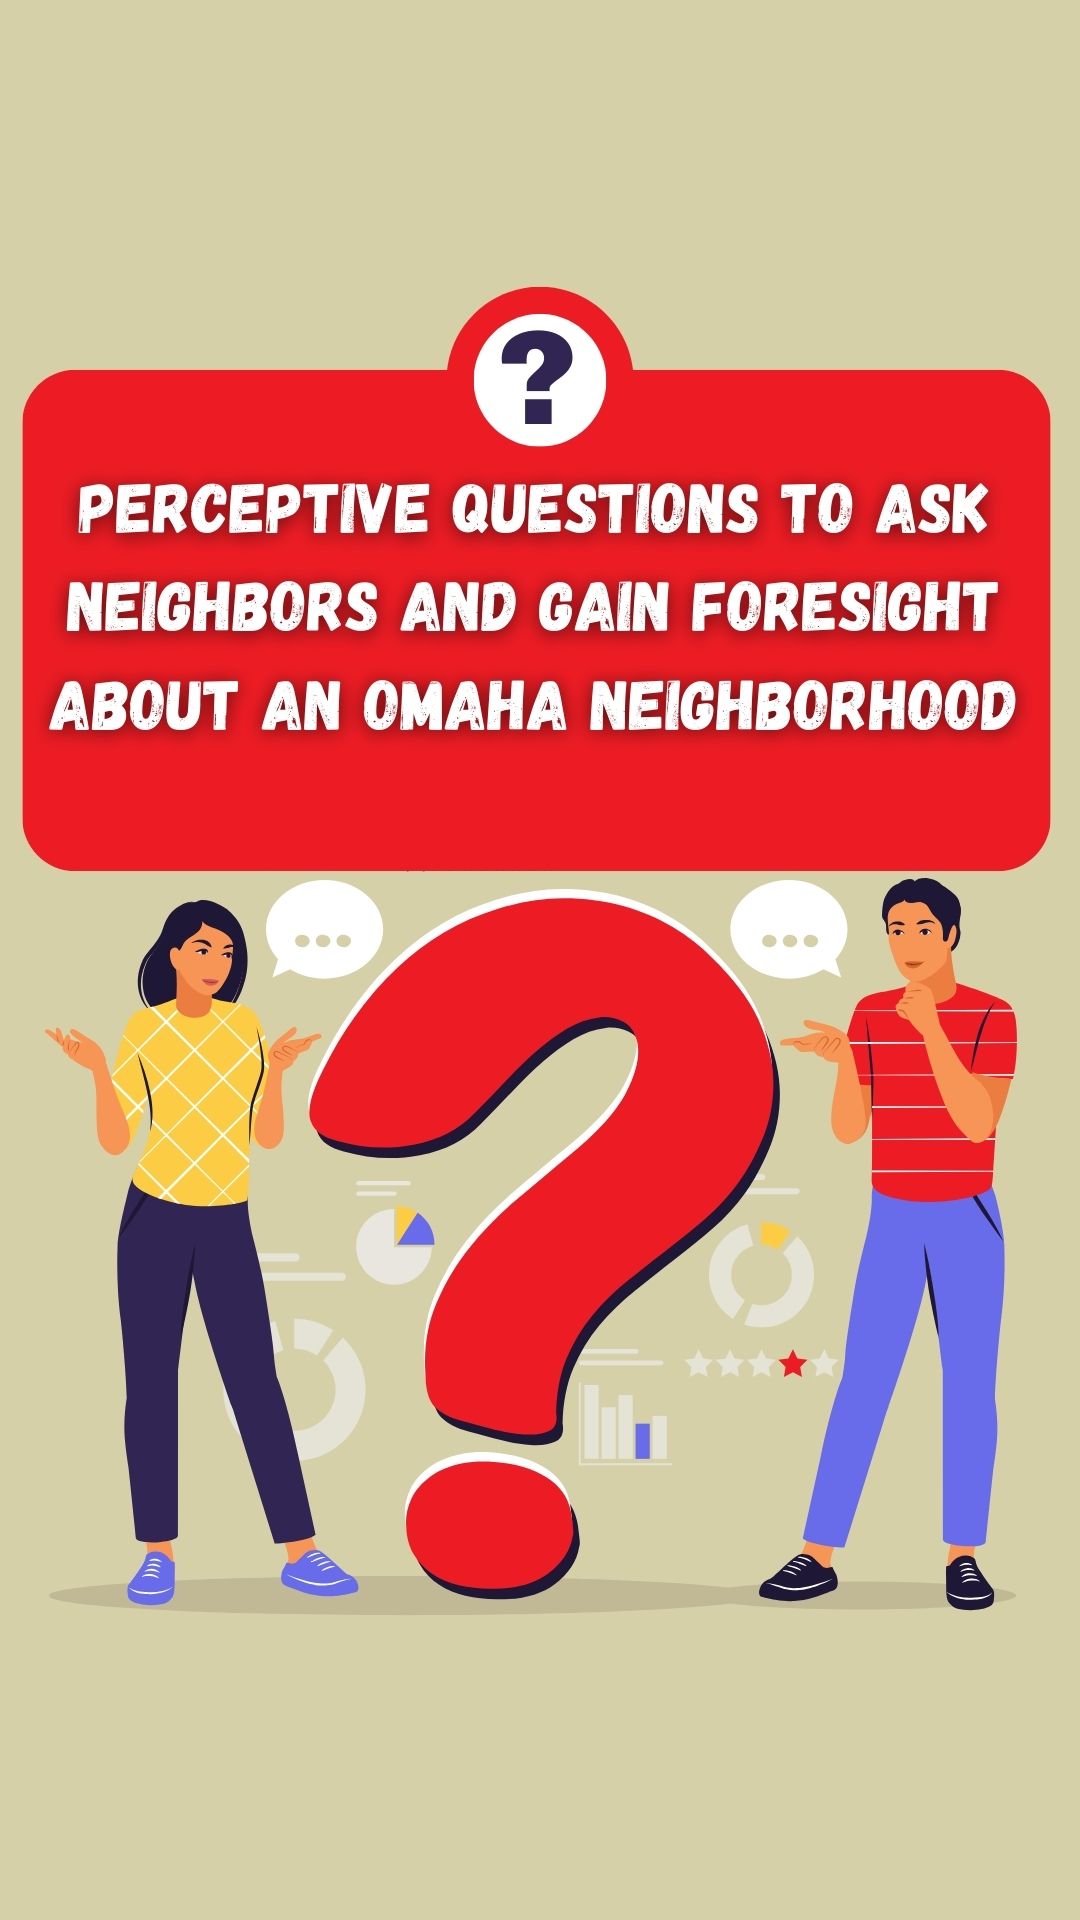 Perceptive Questions to Ask Neighbors and Gain Foresight about an Omaha Neighborhood